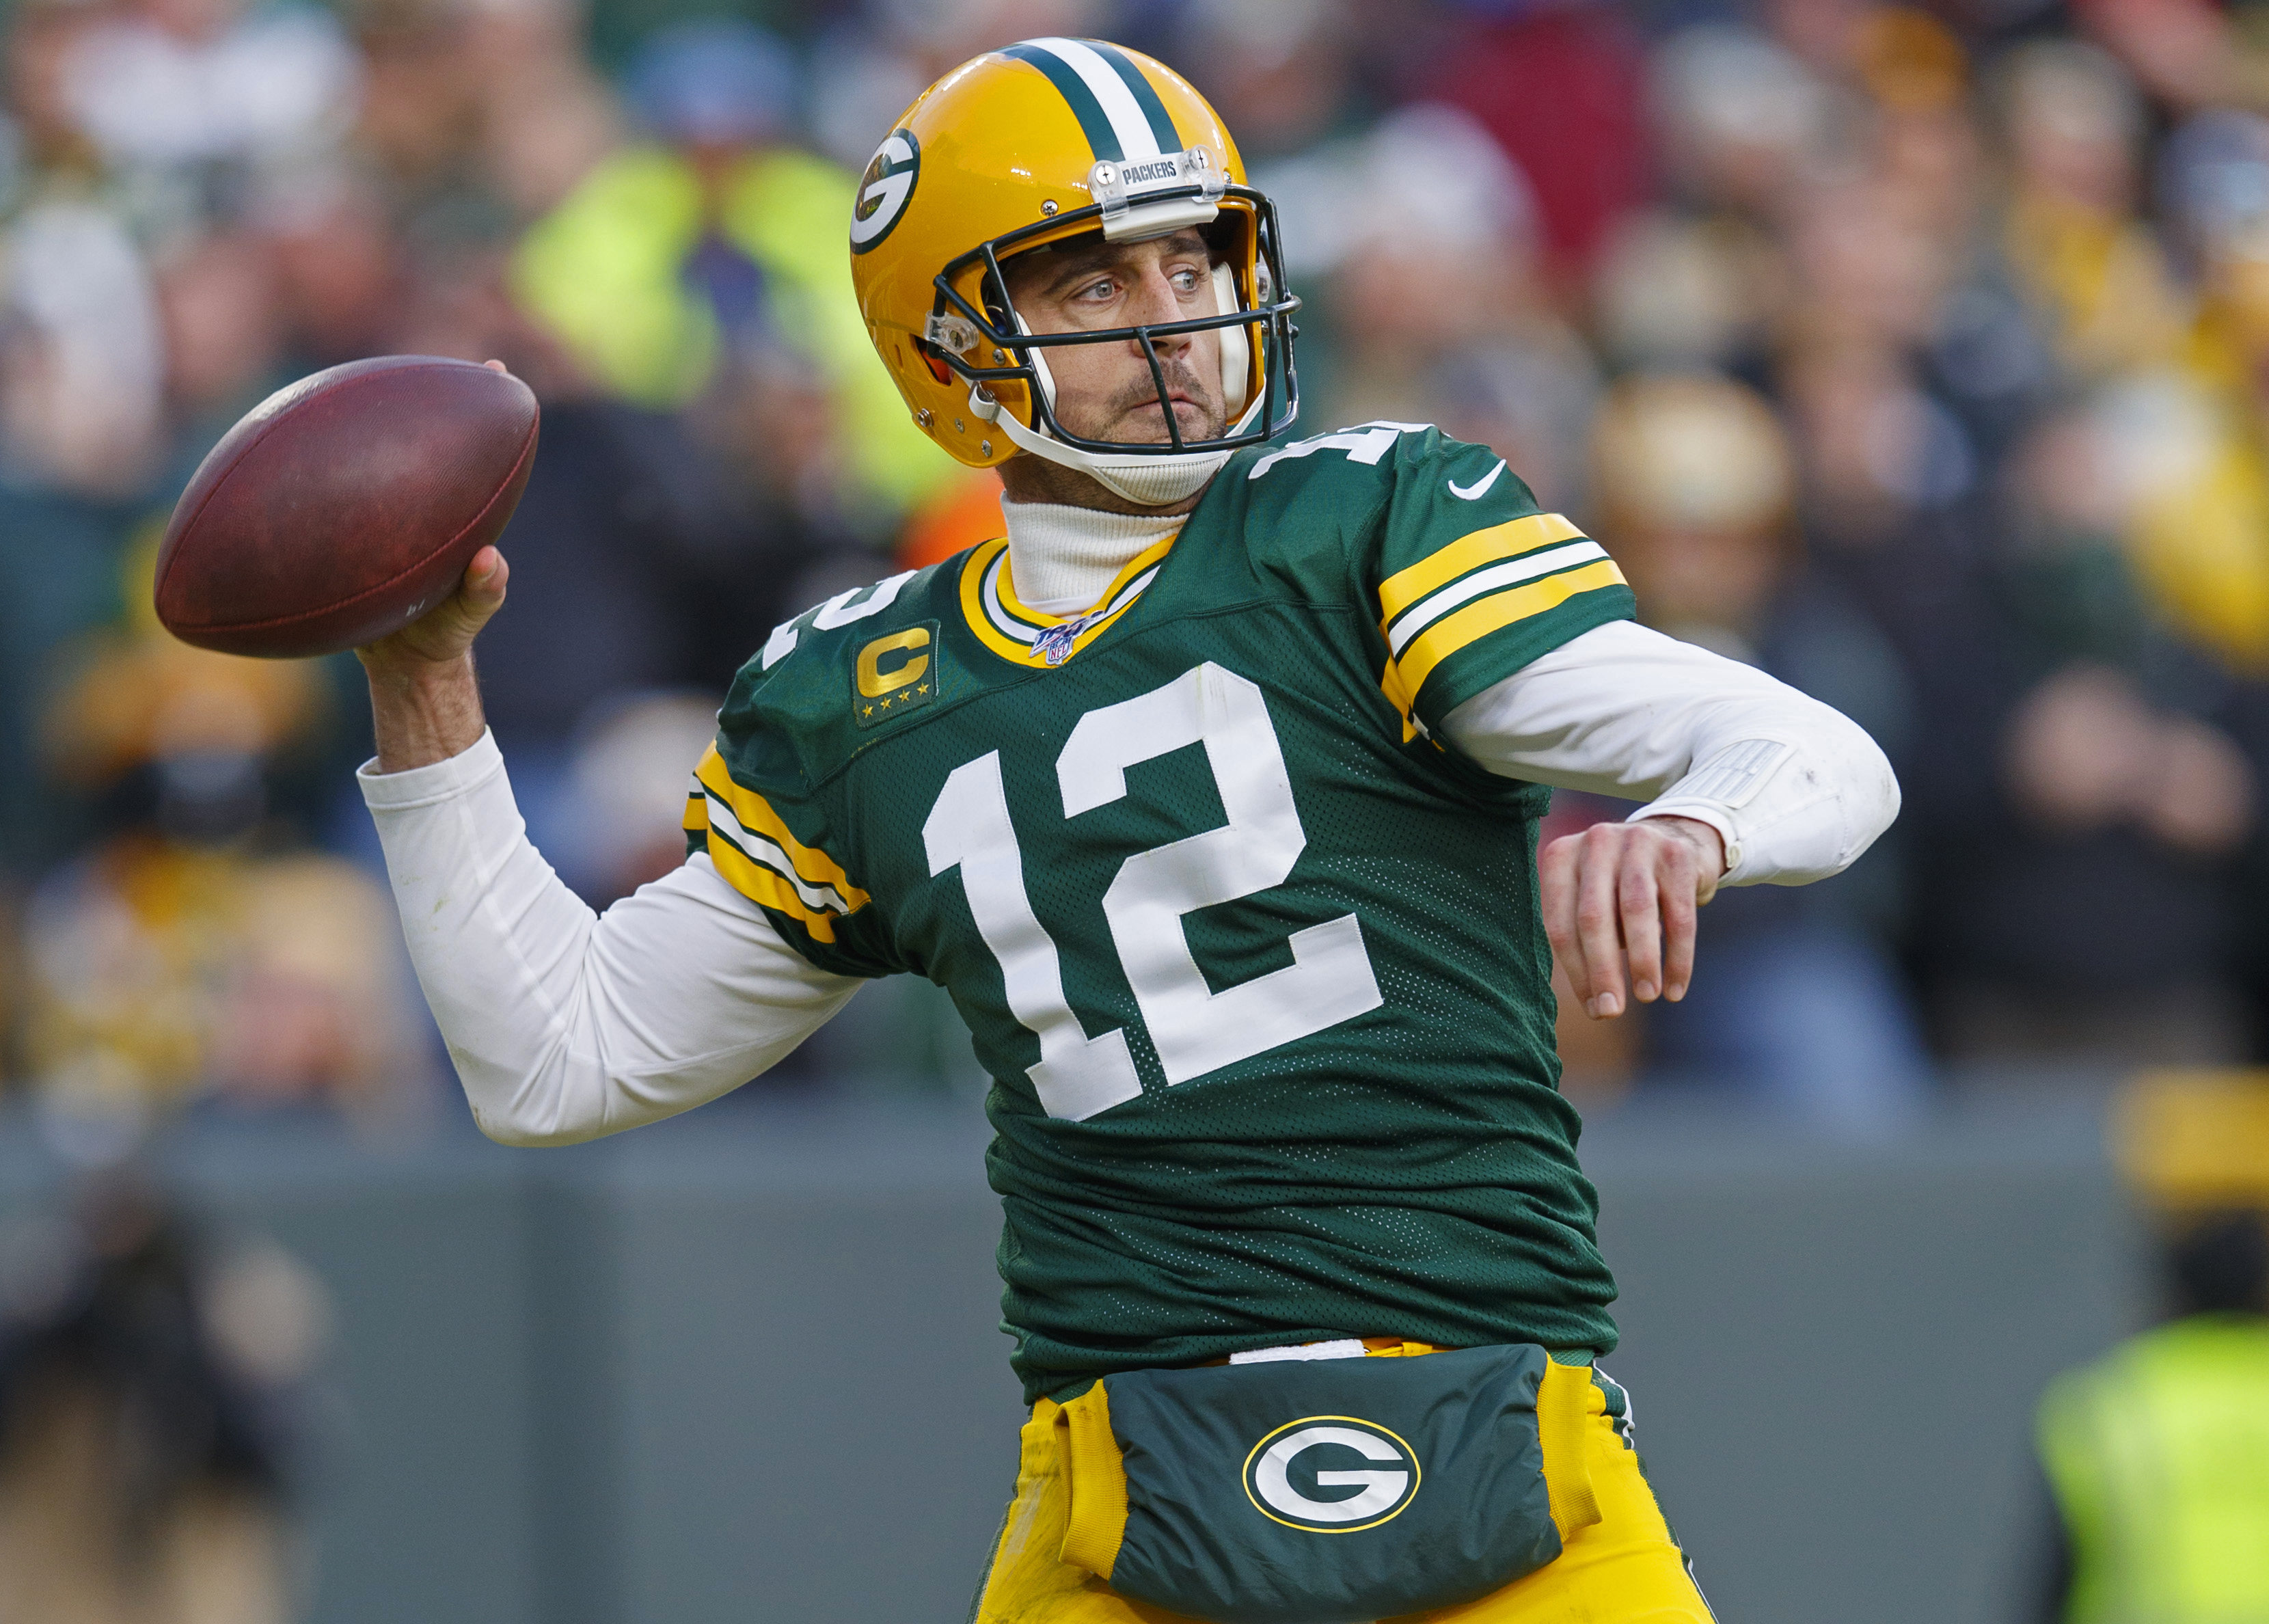 Yes, it's time for Aaron Rodgers to put up or shut up